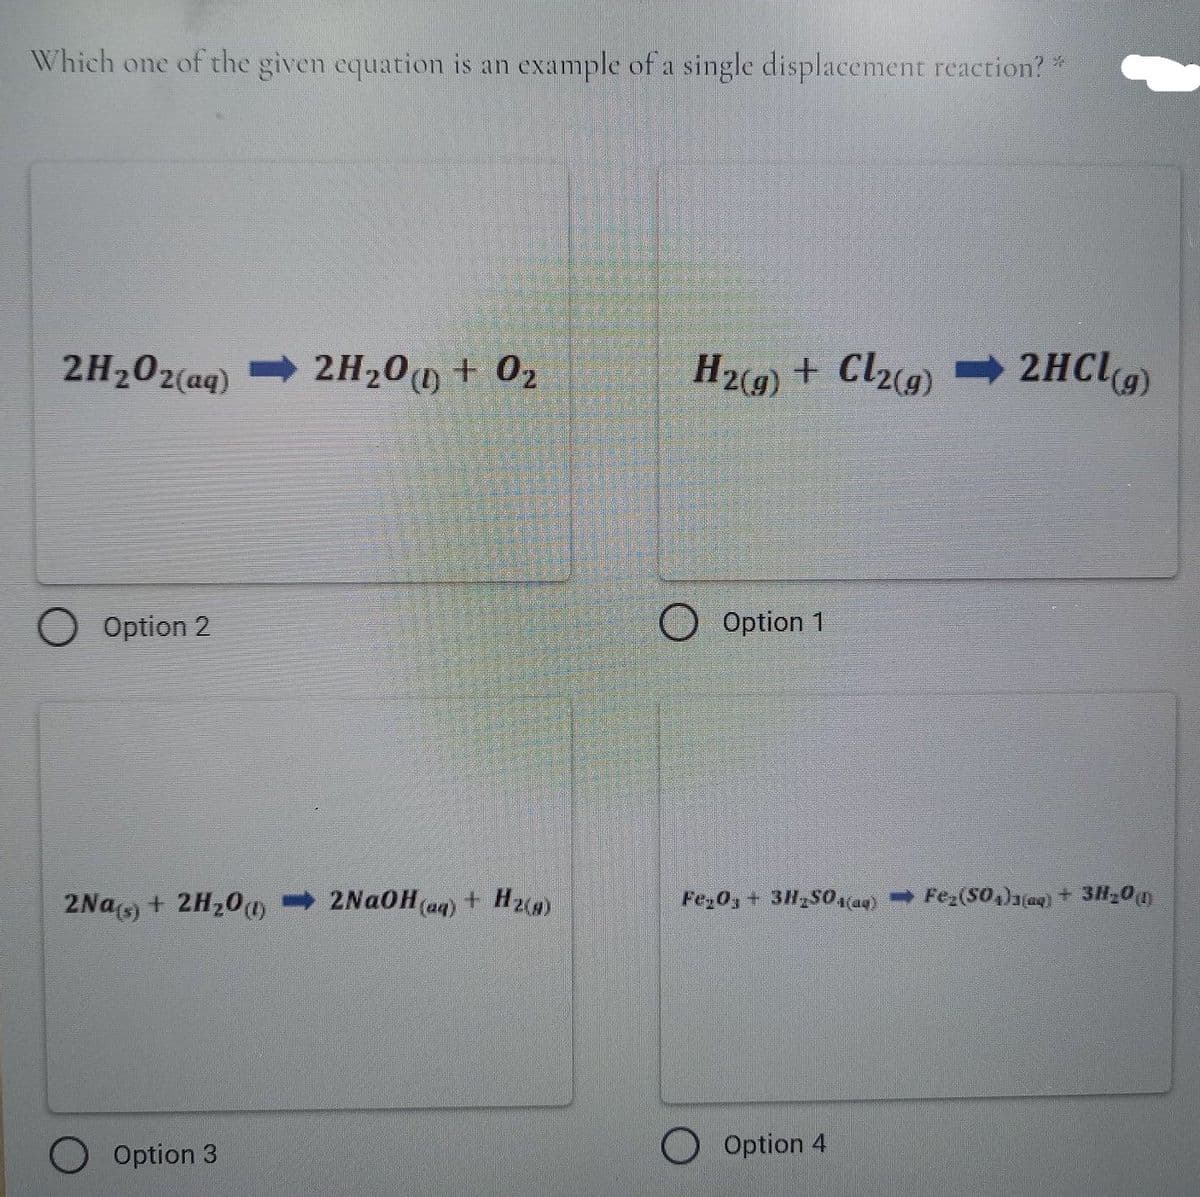 Which one of the given equation is an example of a single displacement reaction?*
2H202(aq)
2H200 + 02
H29) + Cl2)
2HC9)
Option 2
O Option 1
2Nas + 2H20)
2NAOH (aq) + Hz)
Fe,0, + 3H S0a4) - Fez(SO,)1a)+ 3H20n
Option 3
O Option 4
